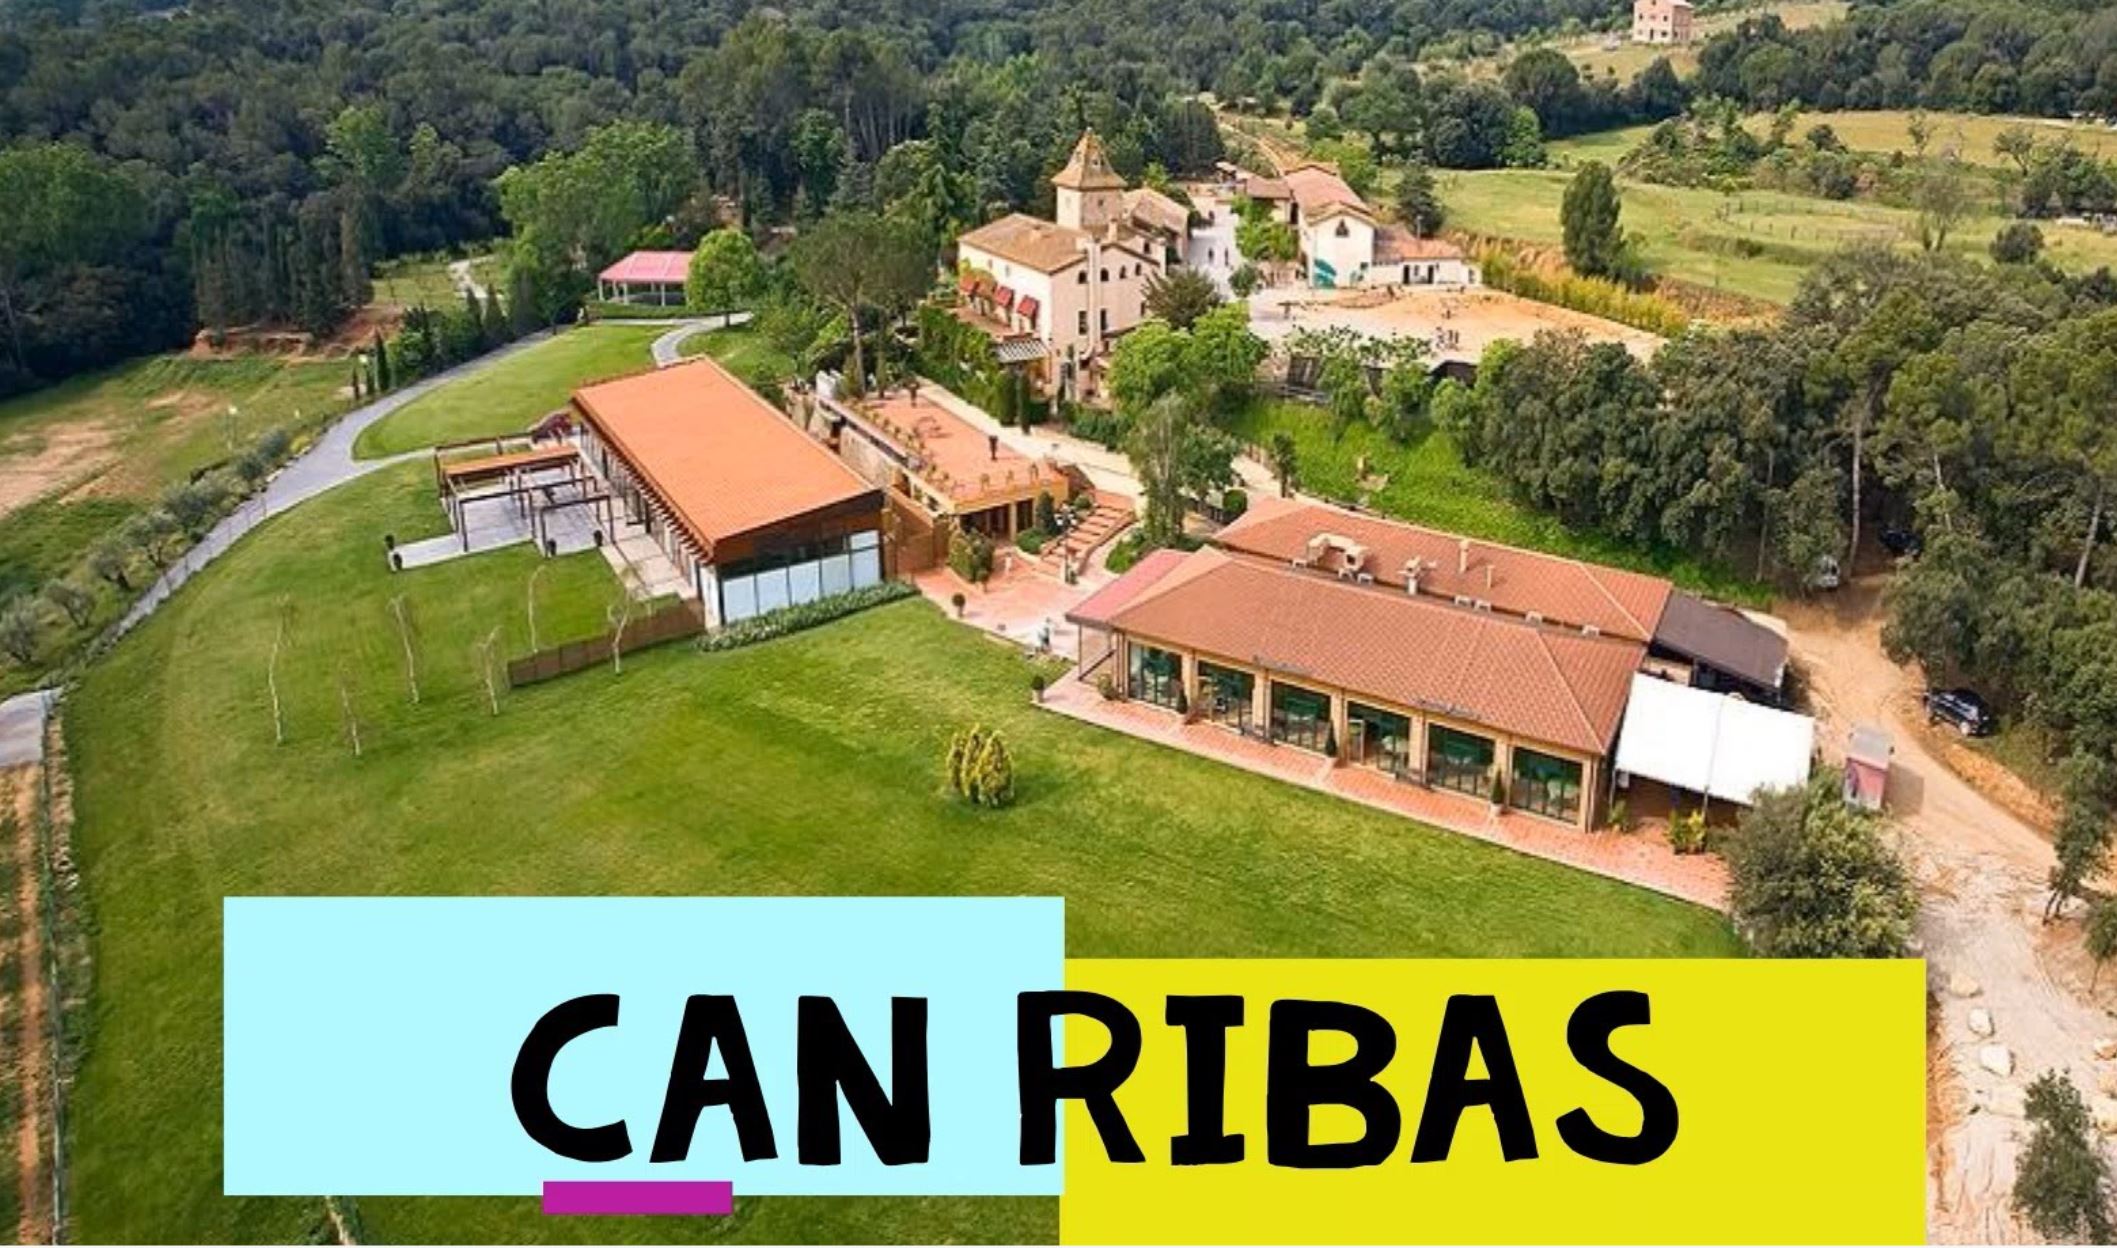 CAN RIBAS